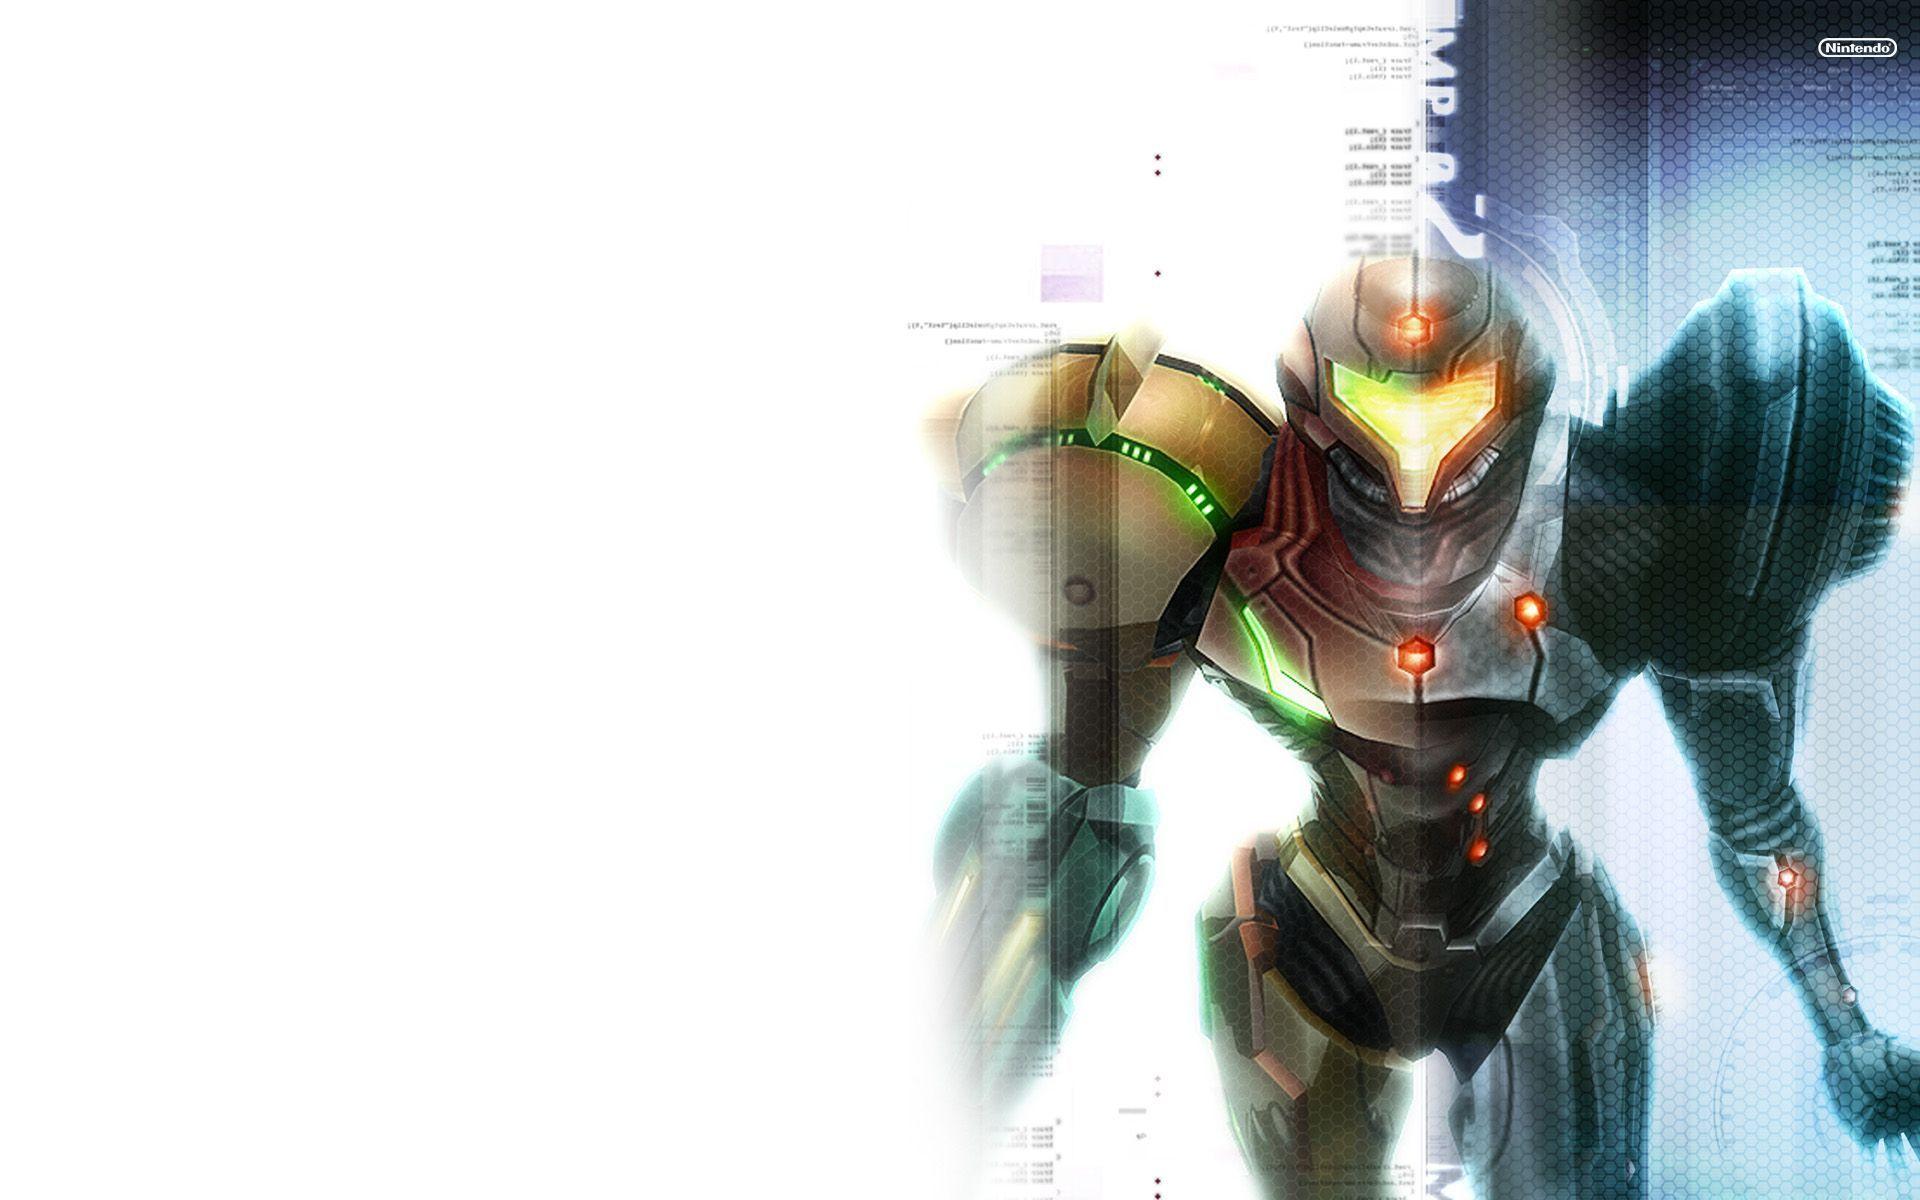 Metroid Prime Live Wallpaper Android